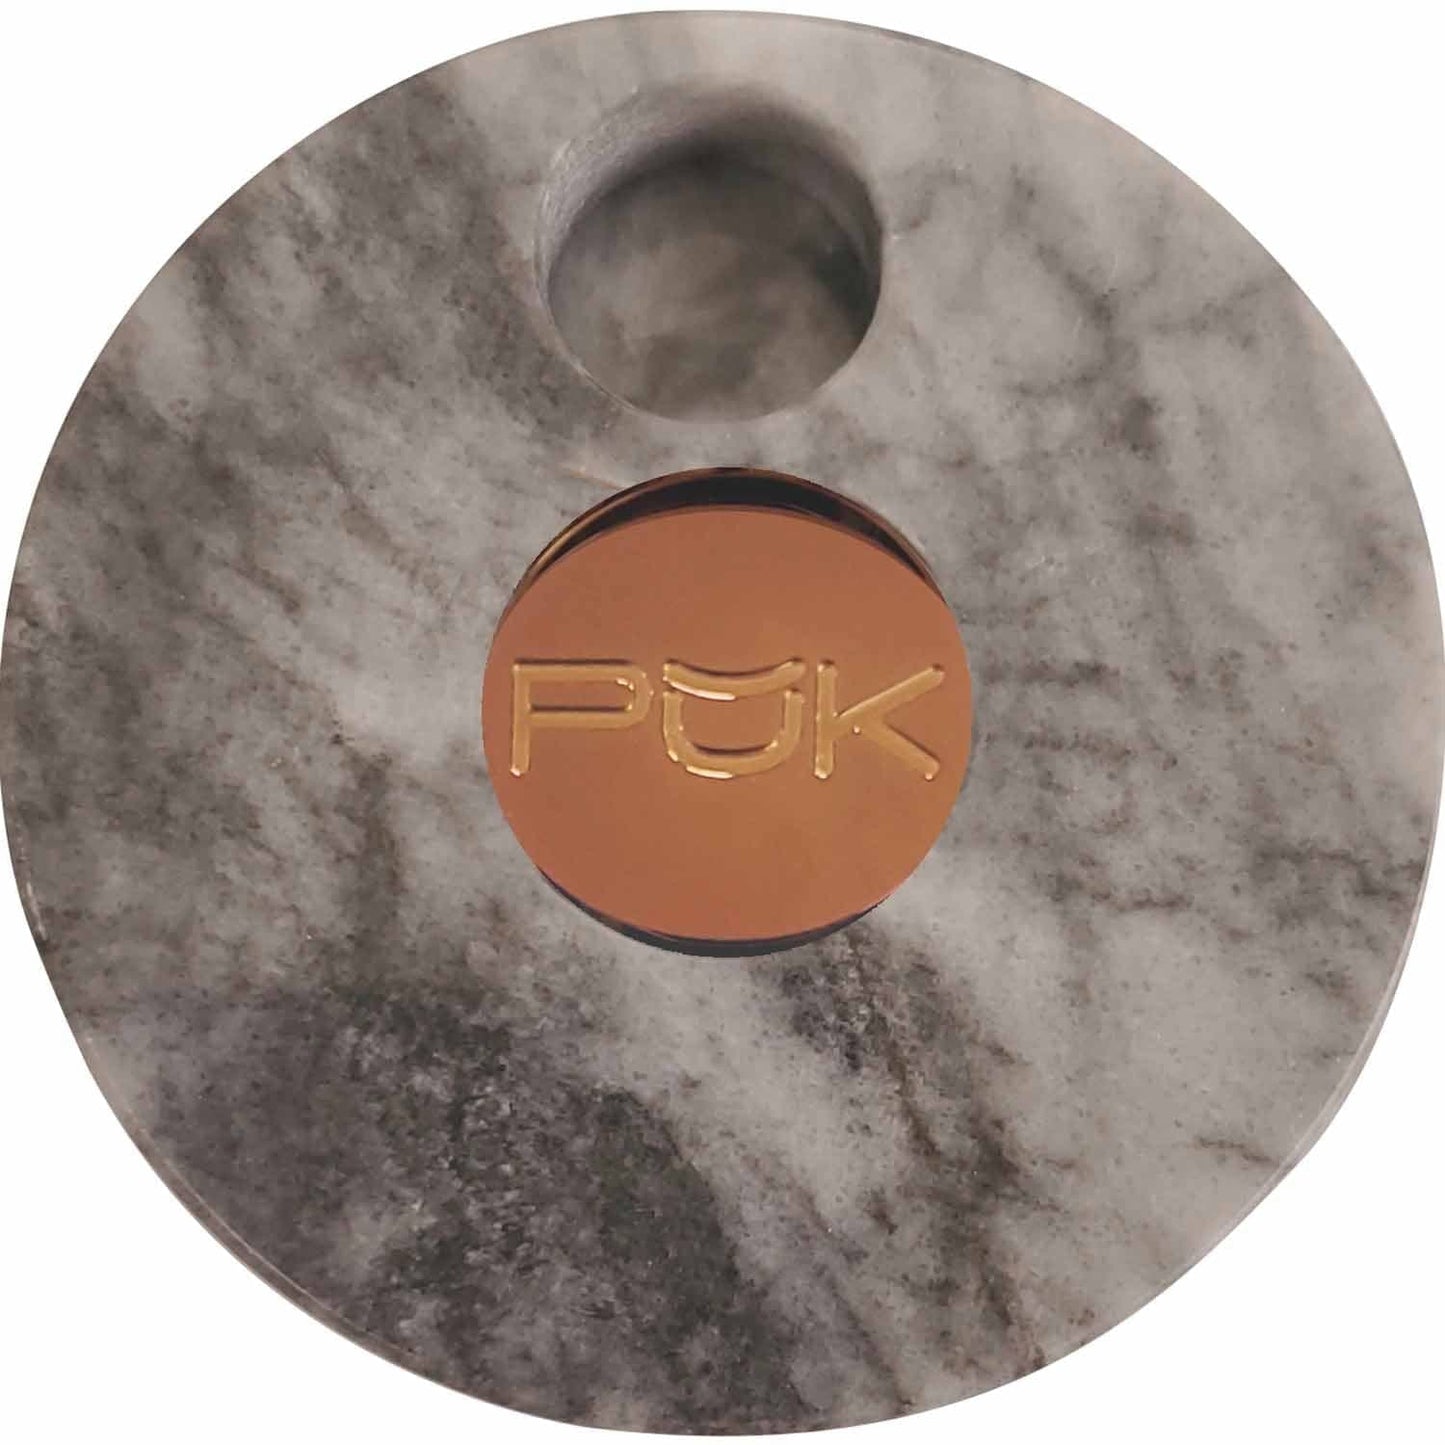 PUK ONLINE STORE Grey Stone PŬK with Rose Bronze Center Marble PŬK Cannabis Container and Smoking Device